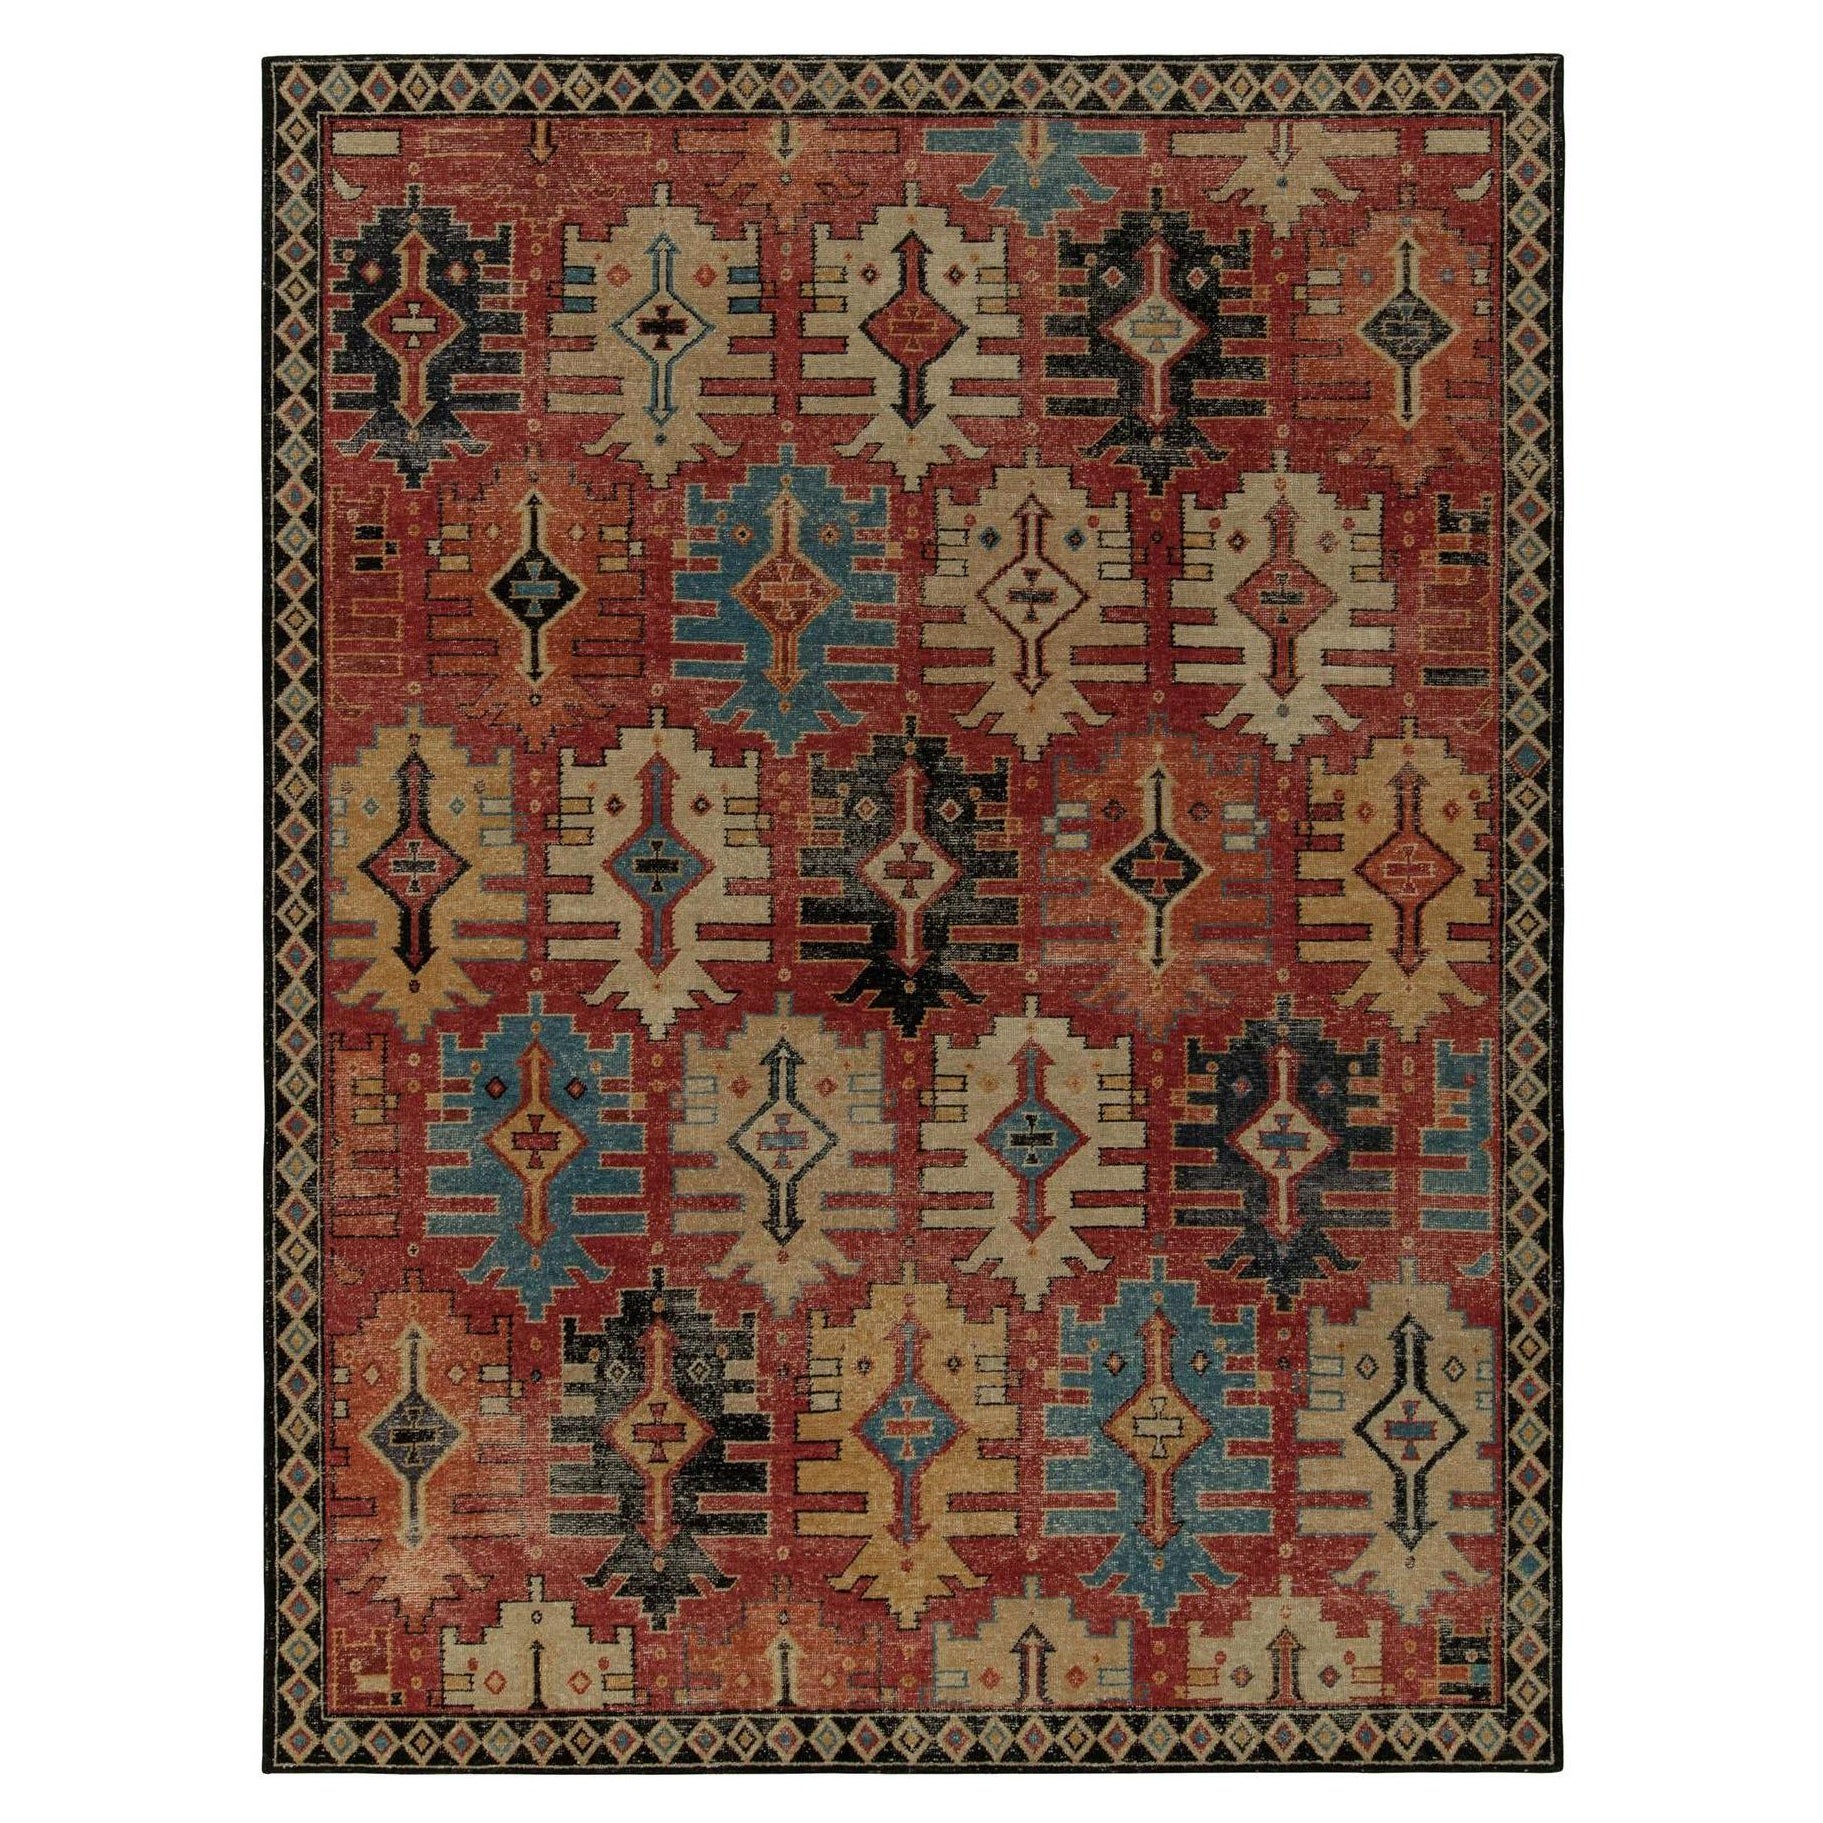 Rug & Kilim’s Distressed Style Rug in Red, Black, Beige, Gold Tribal Patterns For Sale